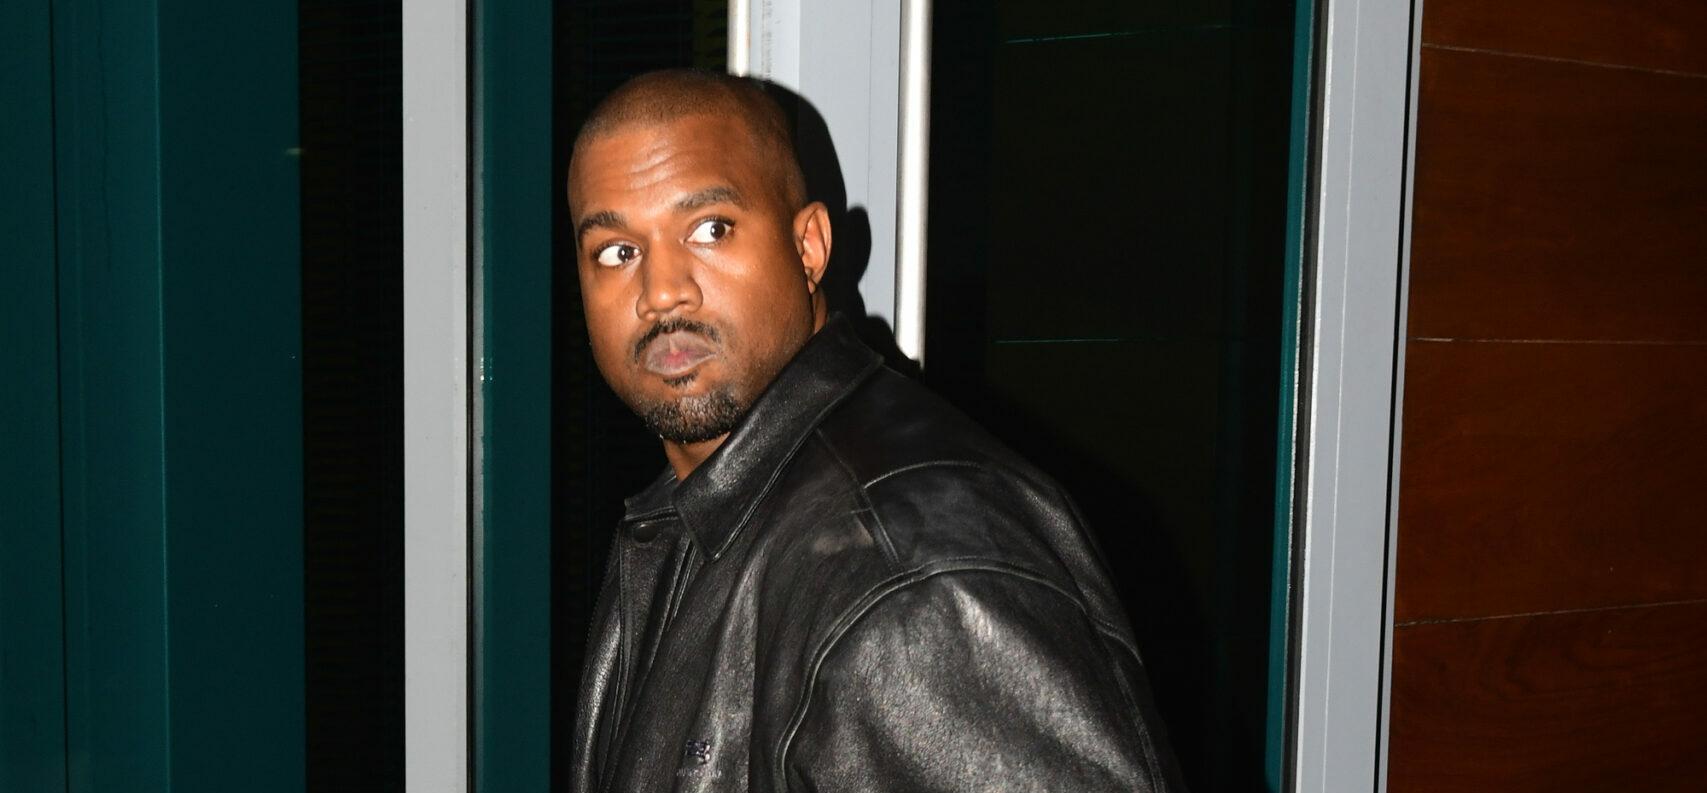 Kanye West Sued By Project Manager Of Malibu Home Over Brutal Conditions